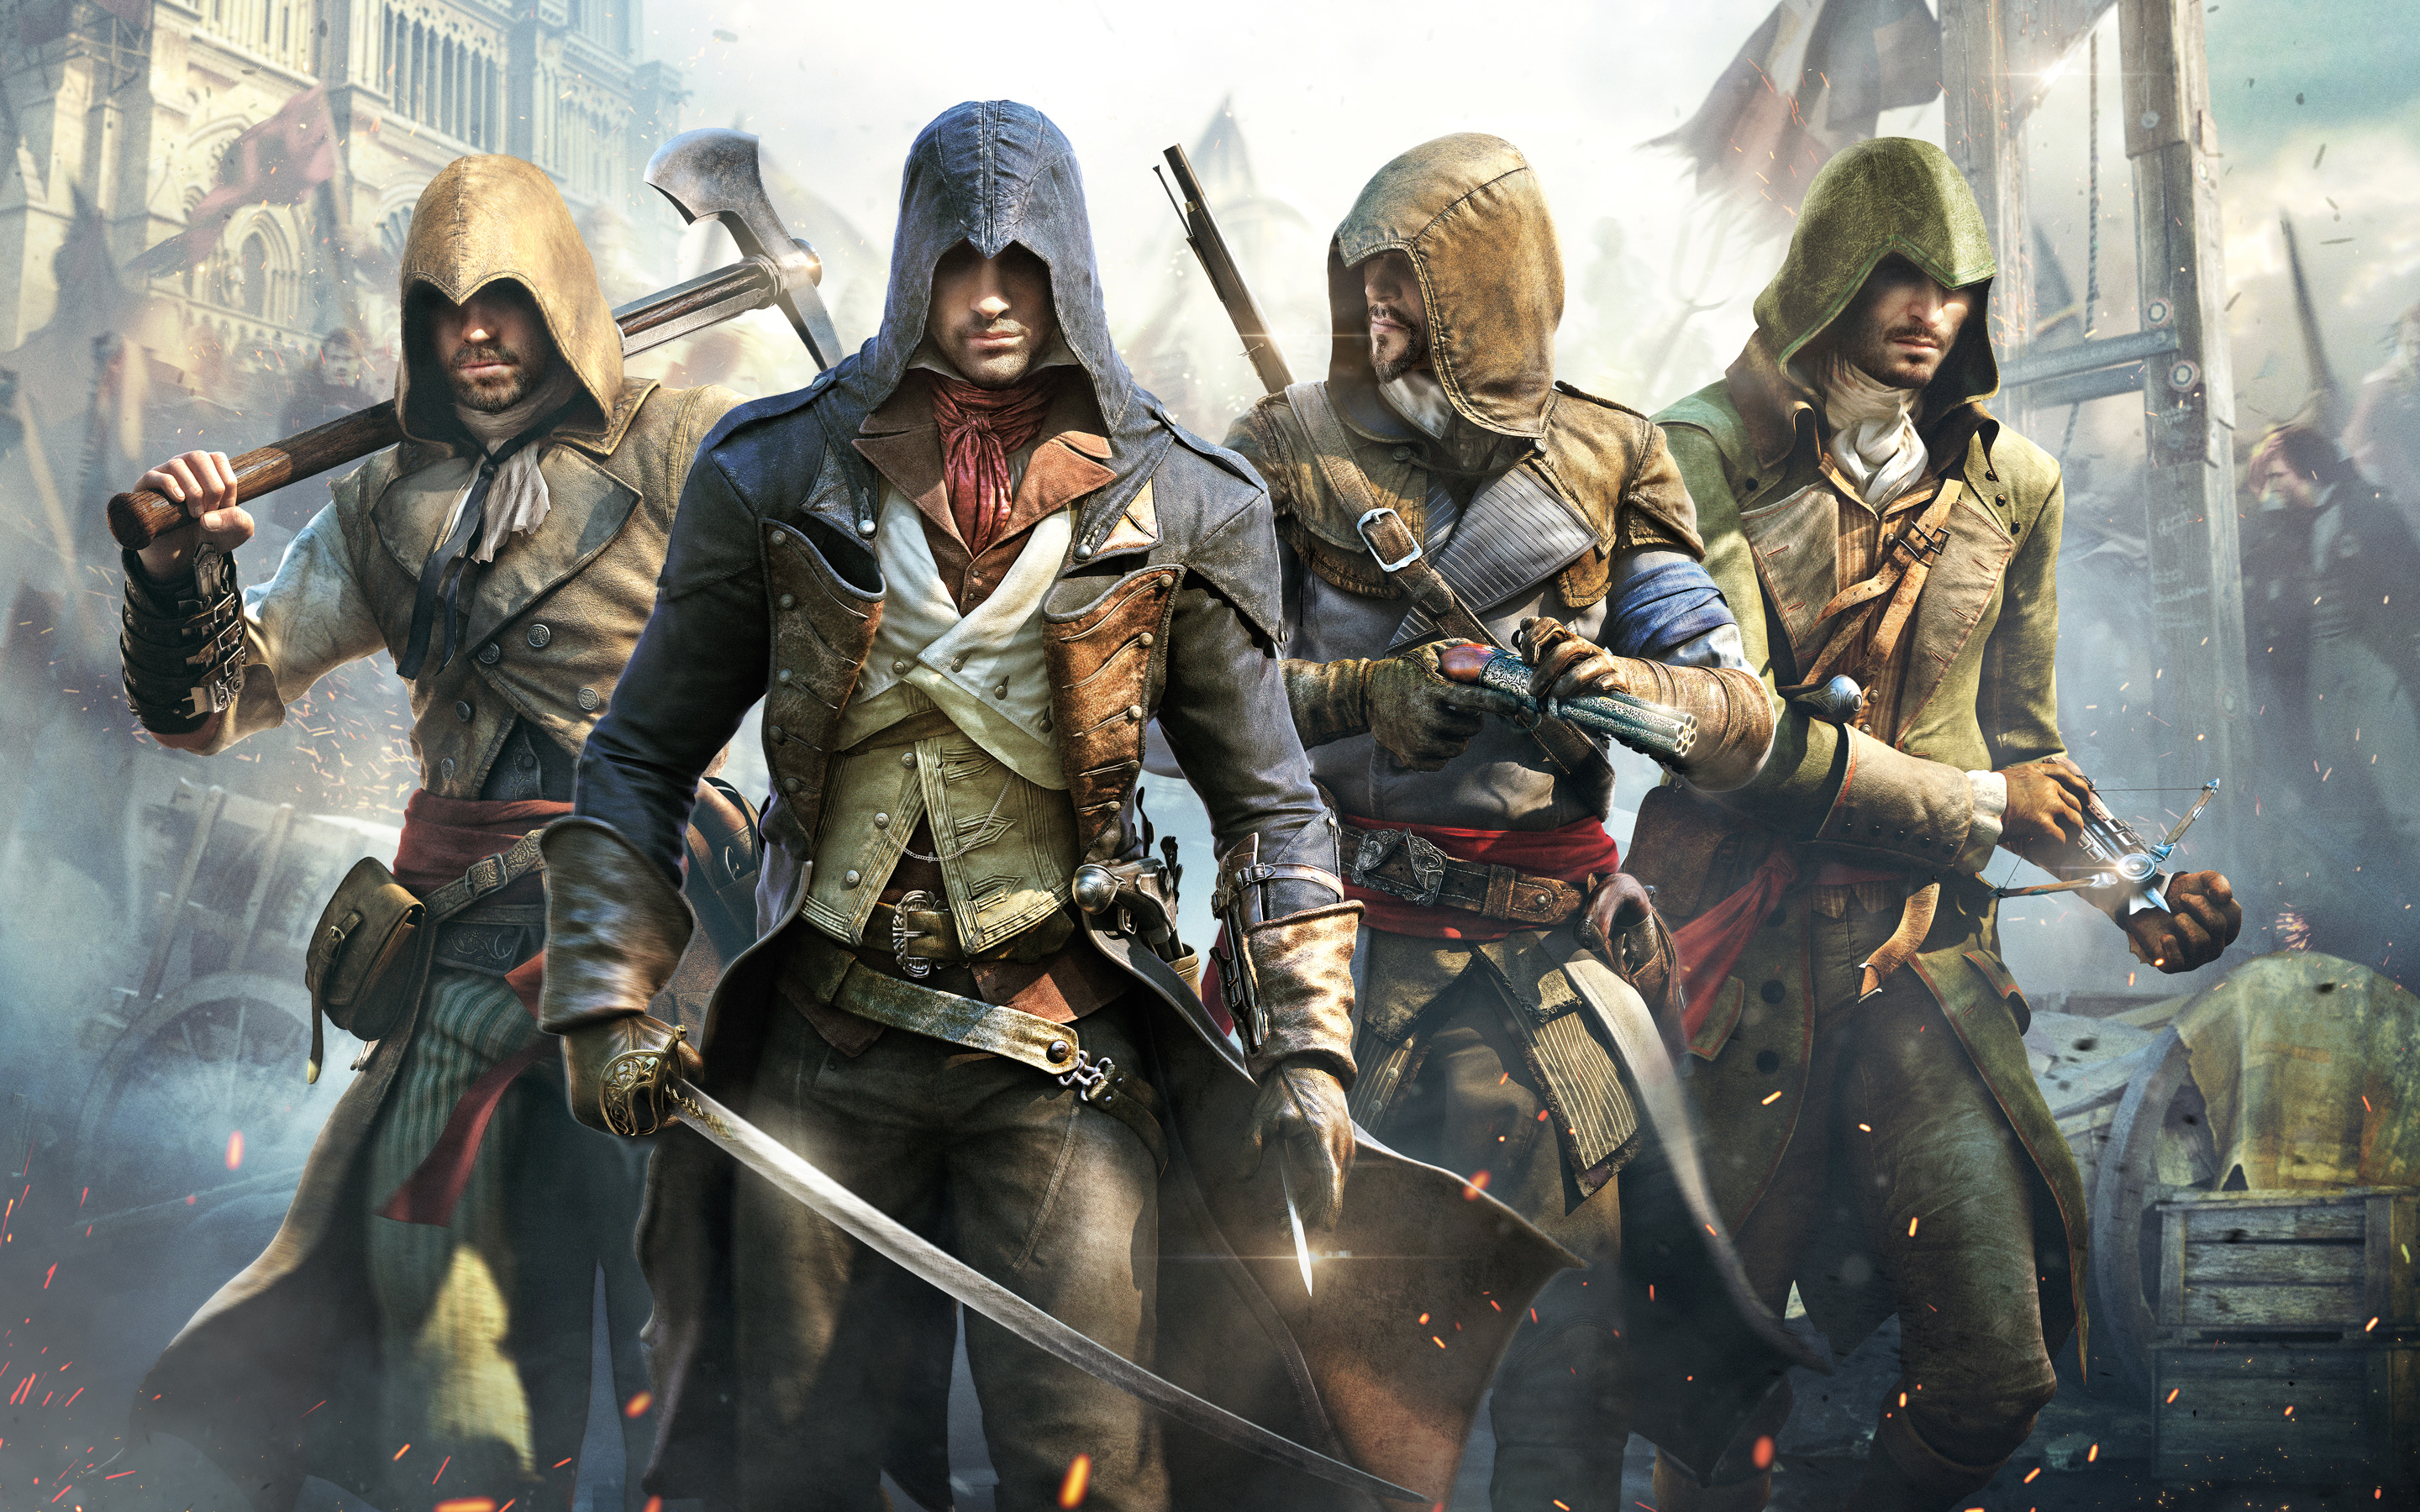 Awesome Assassins Creed Unity Wallpaper x1800